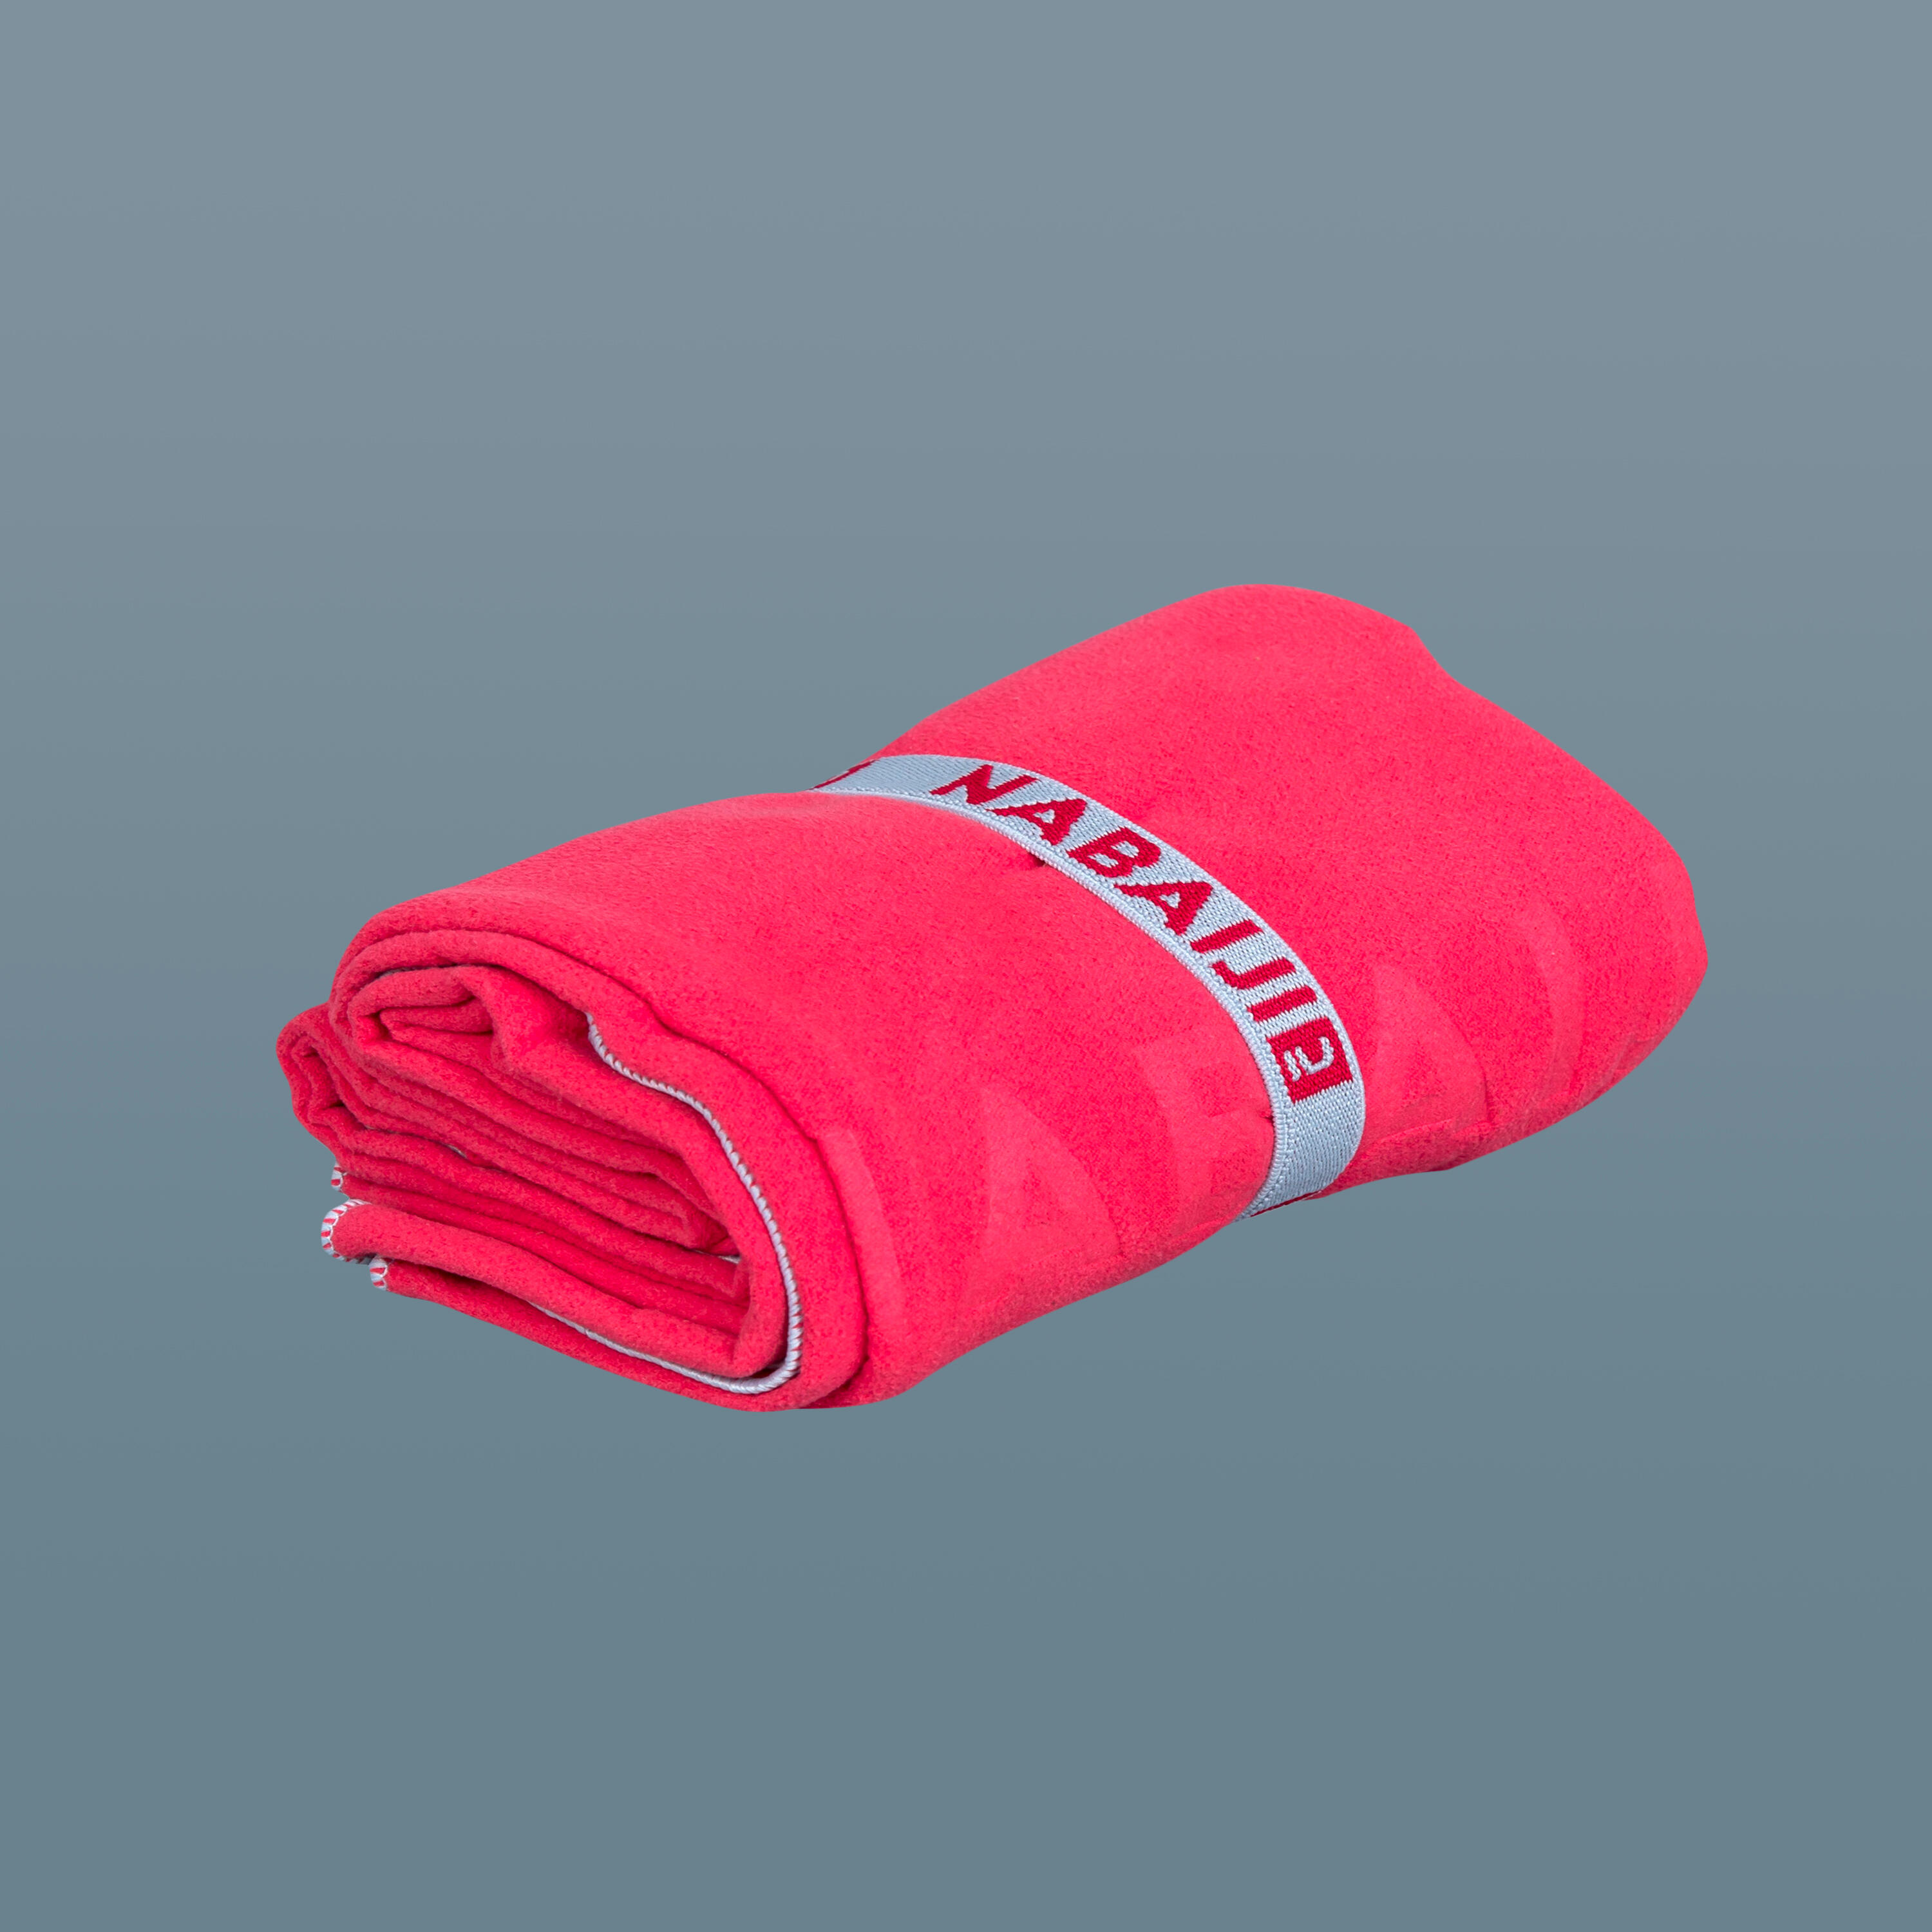 KID'S COMPACT BATHROBE AND TOWEL - RED 7/7